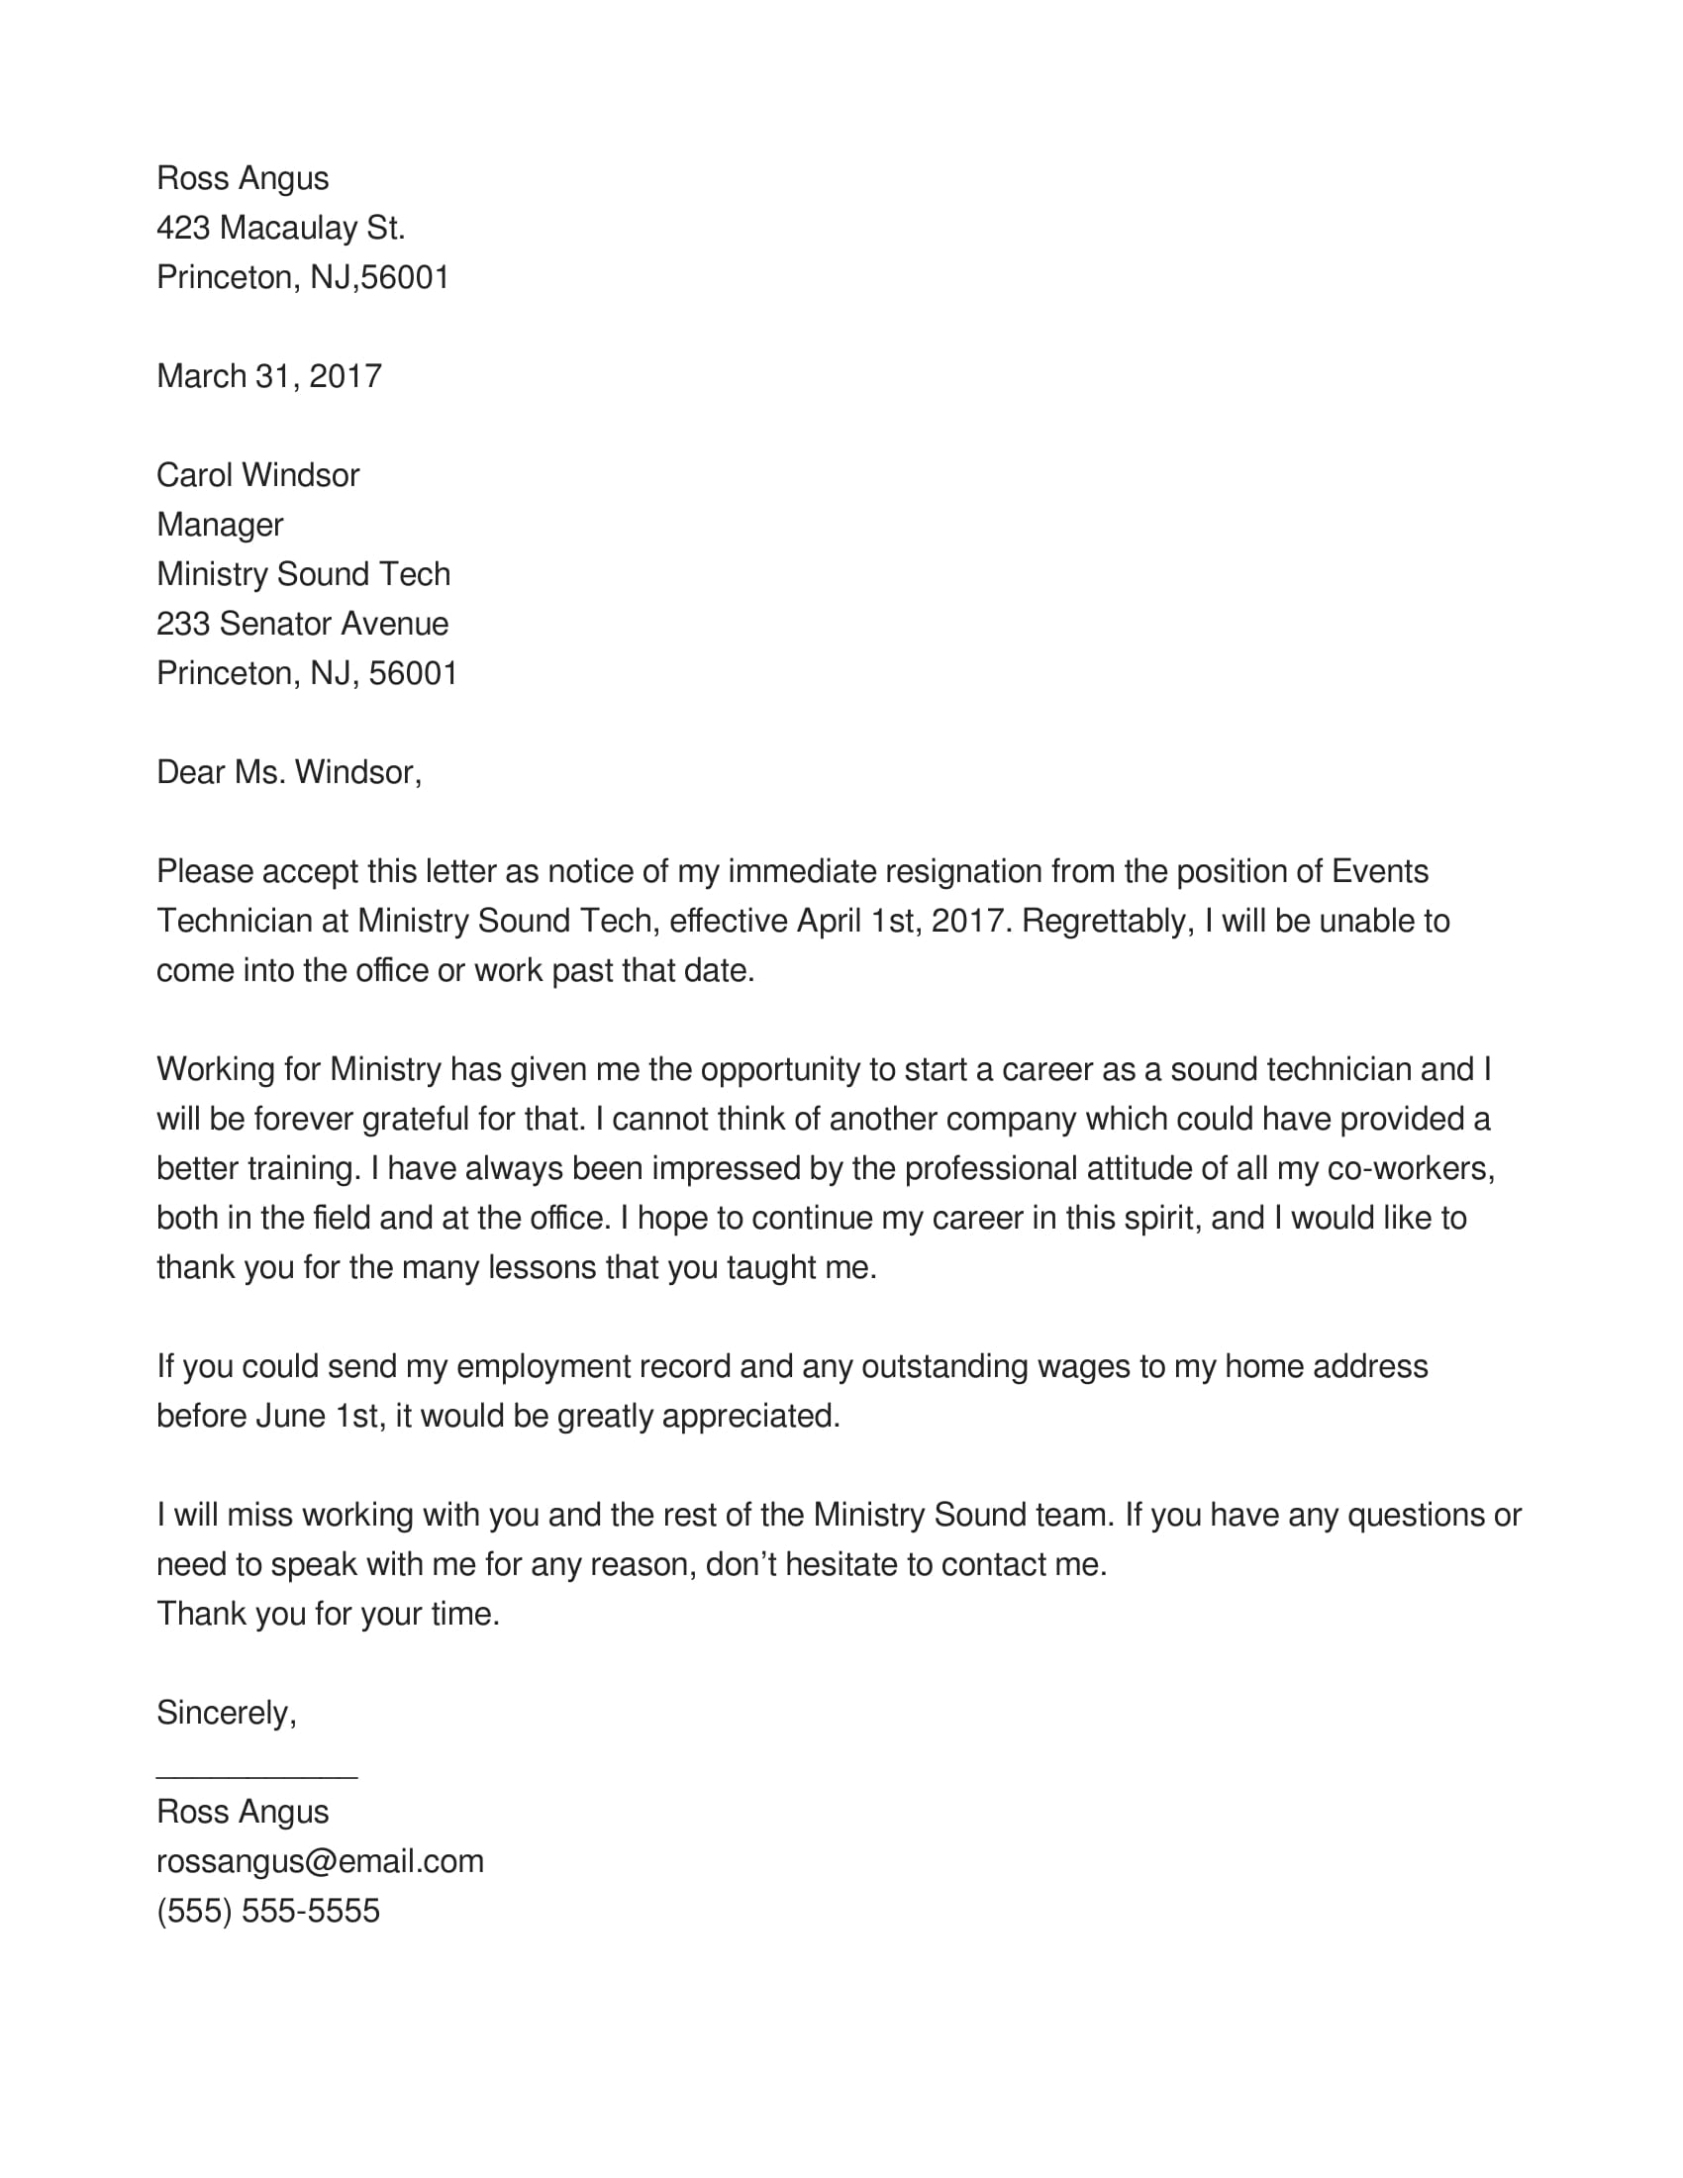 Immediate Resignation Letter - 15+ Examples, Format, Sample | Examples throughout Draft Letter Of Resignation Template